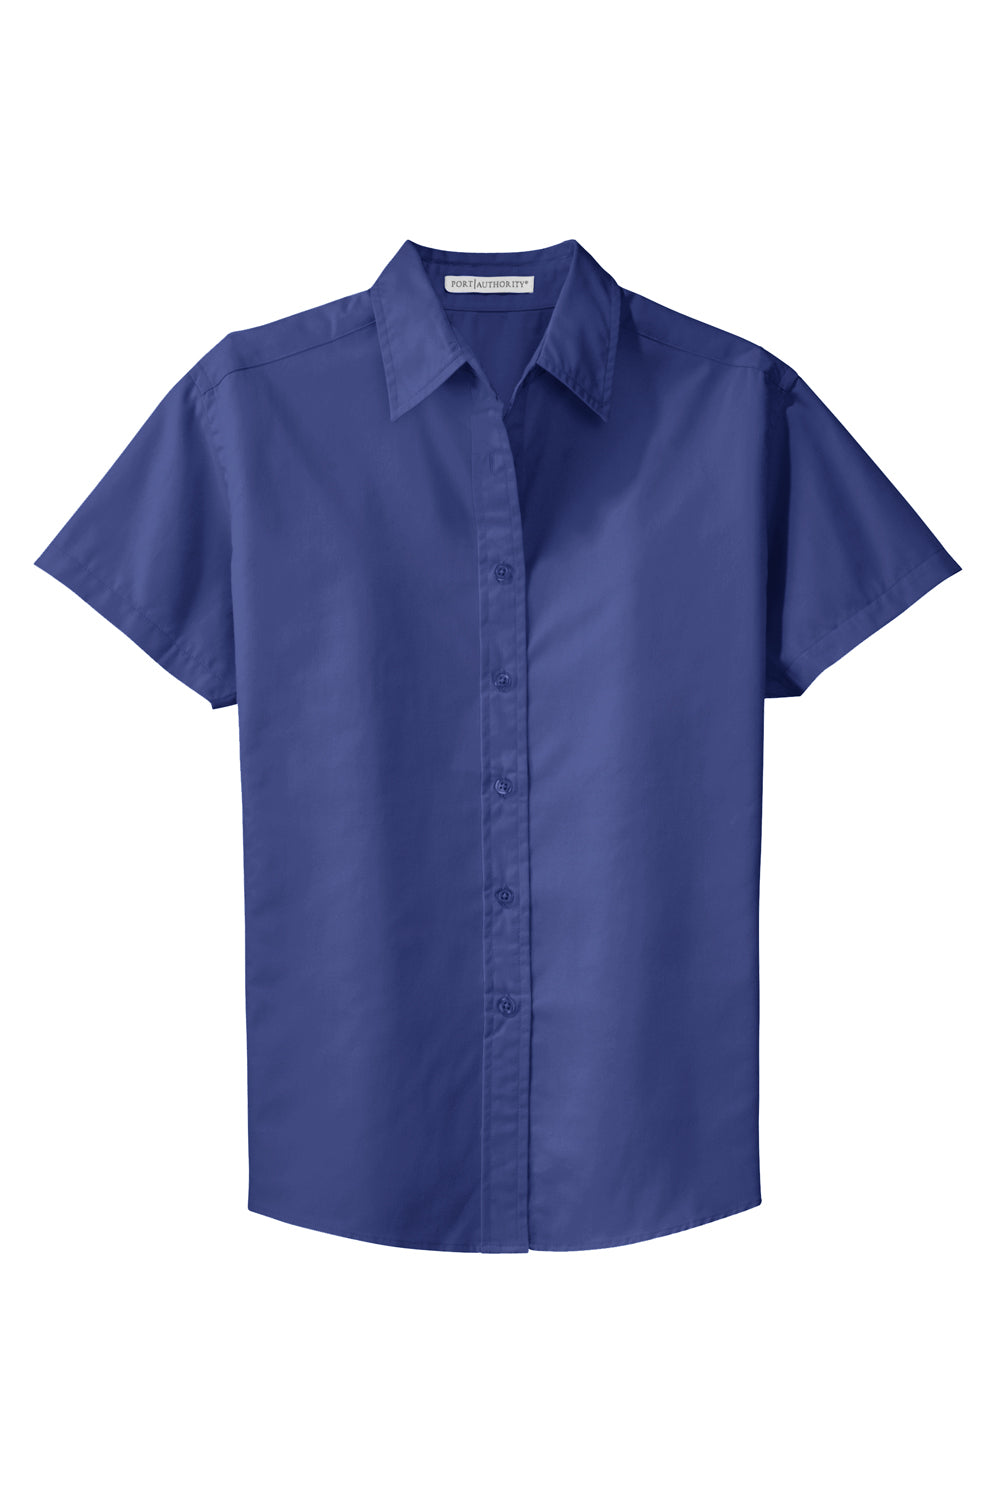 Port Authority L508 Womens Easy Care Wrinkle Resistant Short Sleeve Button Down Shirt Mediterranean Blue Flat Front